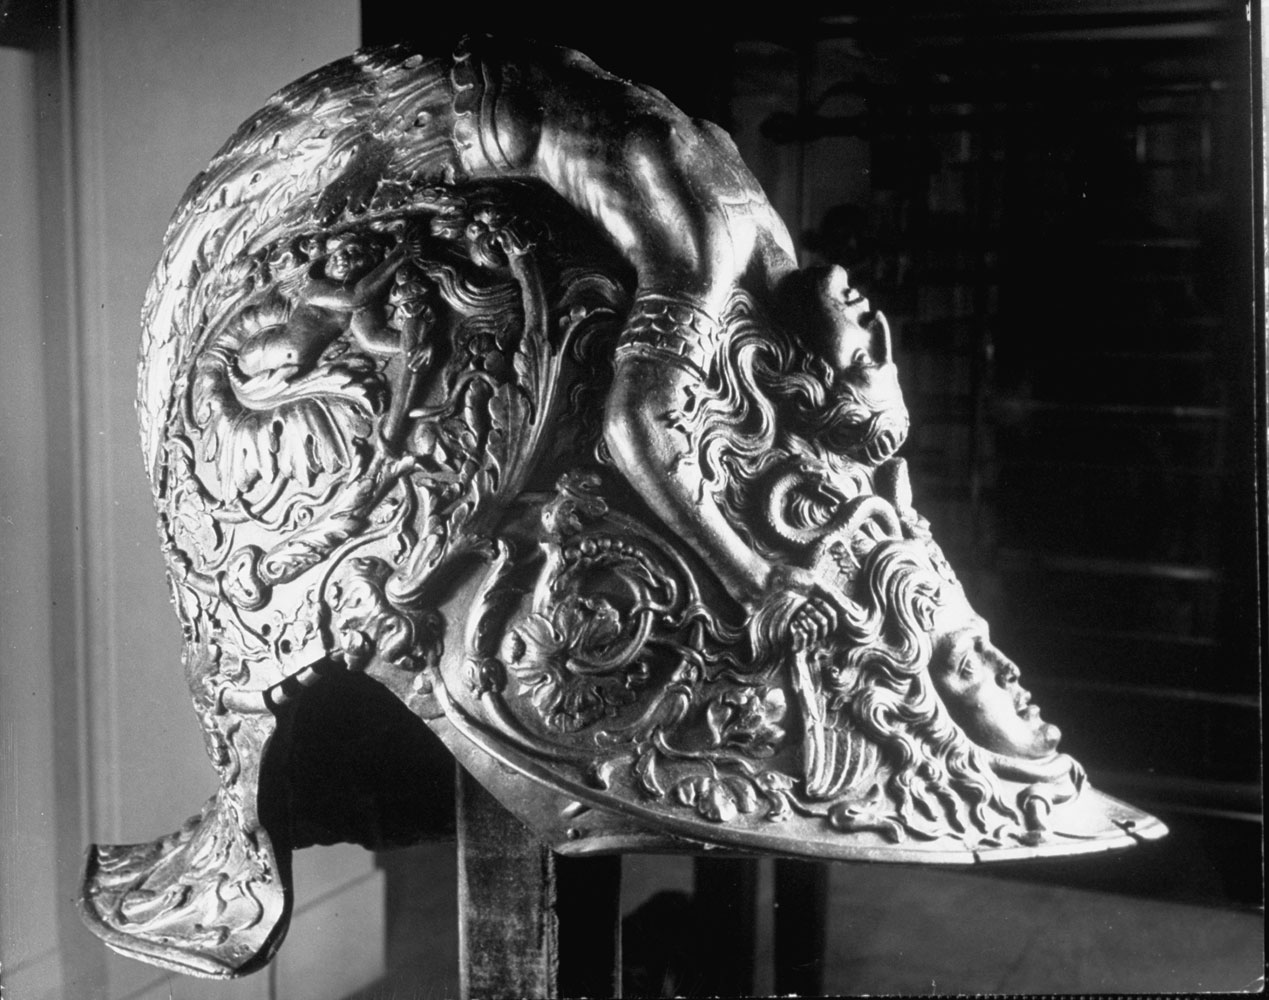 An ornate helmet adorned with semi-nude figures sits in the collection of the Metropolitan Museum of Art.